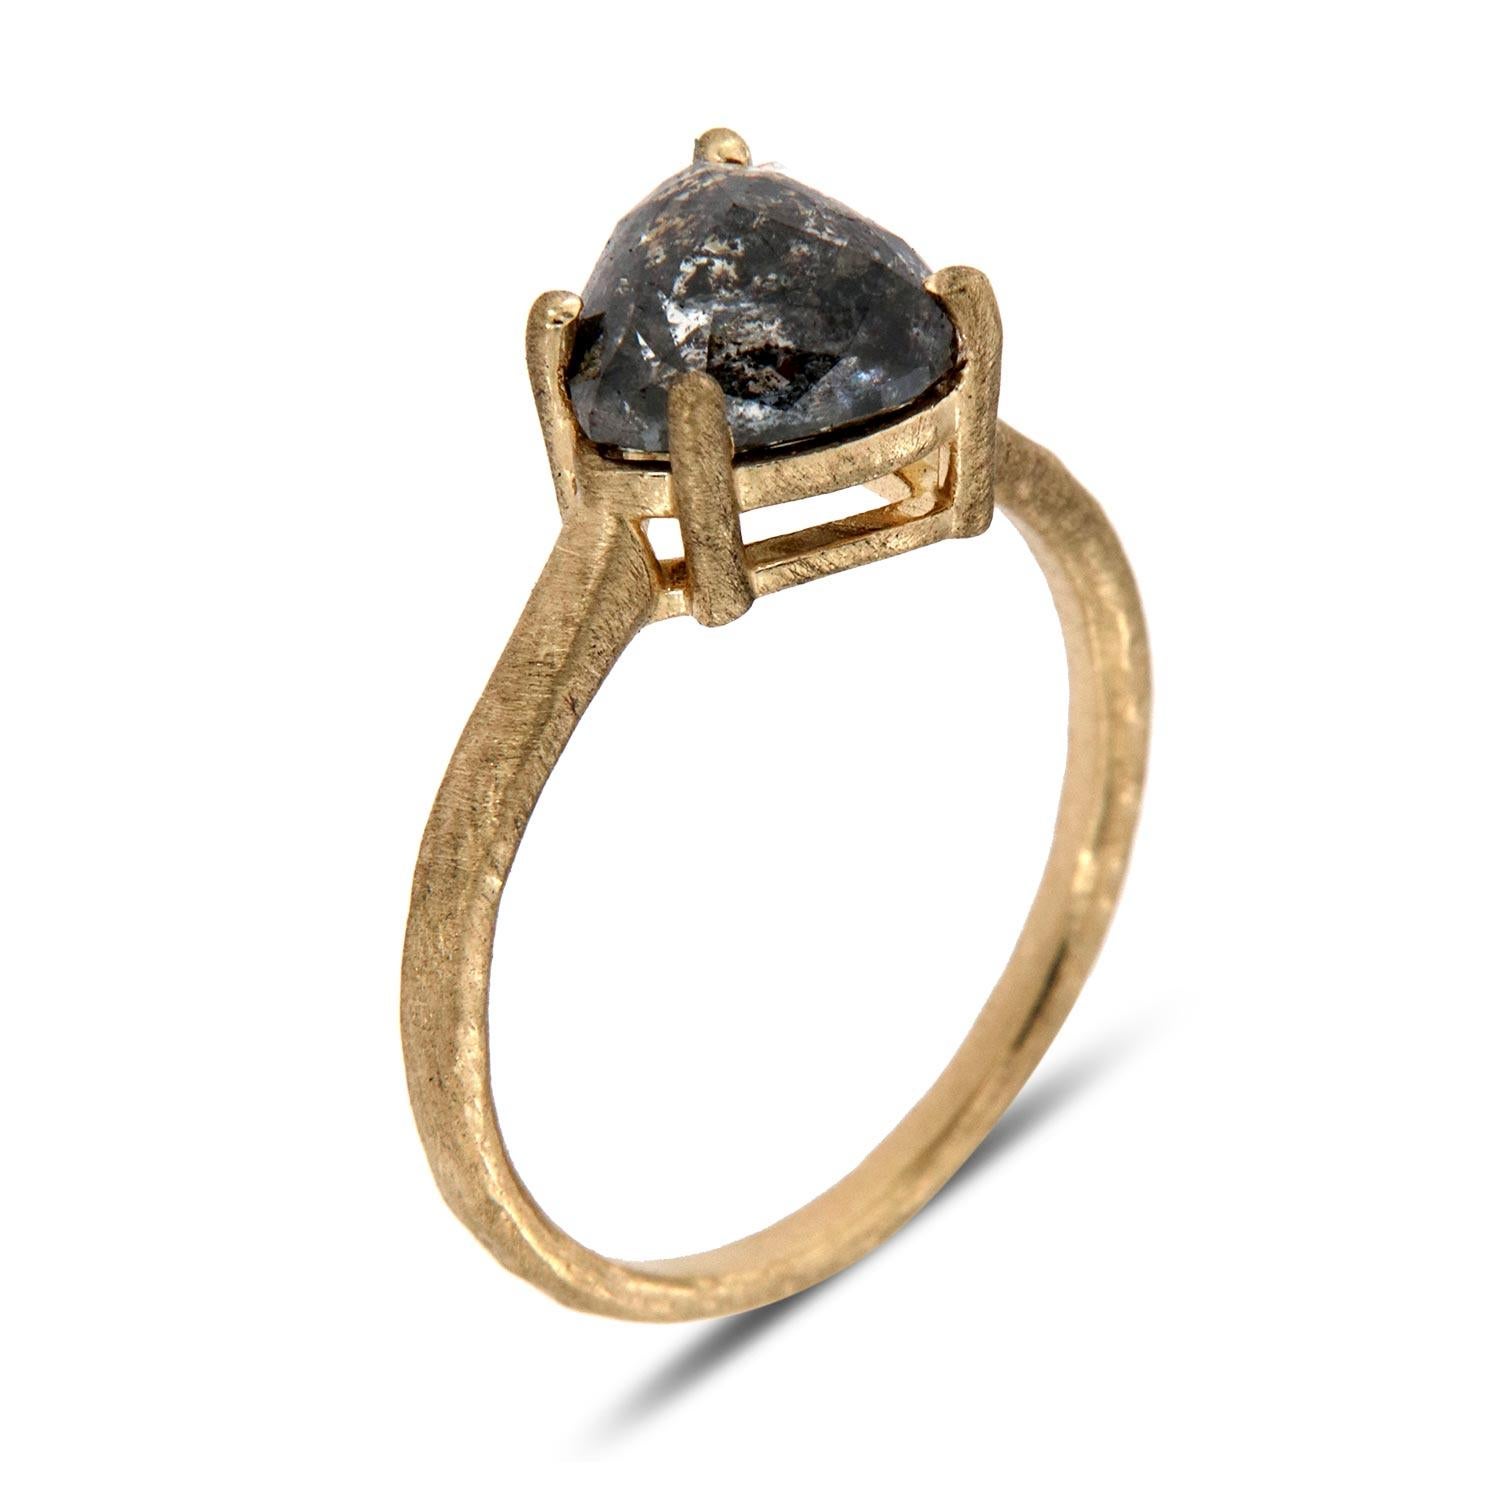 This Earthy design solitaire ring features a faceted 2.04 -Carat Salt & Pepper Trilliant Natural diamond prong- set on a 1.5 mm matte-finished band. The unique texture that we applied to the band adds to the ring's rustic appeal. Experience the